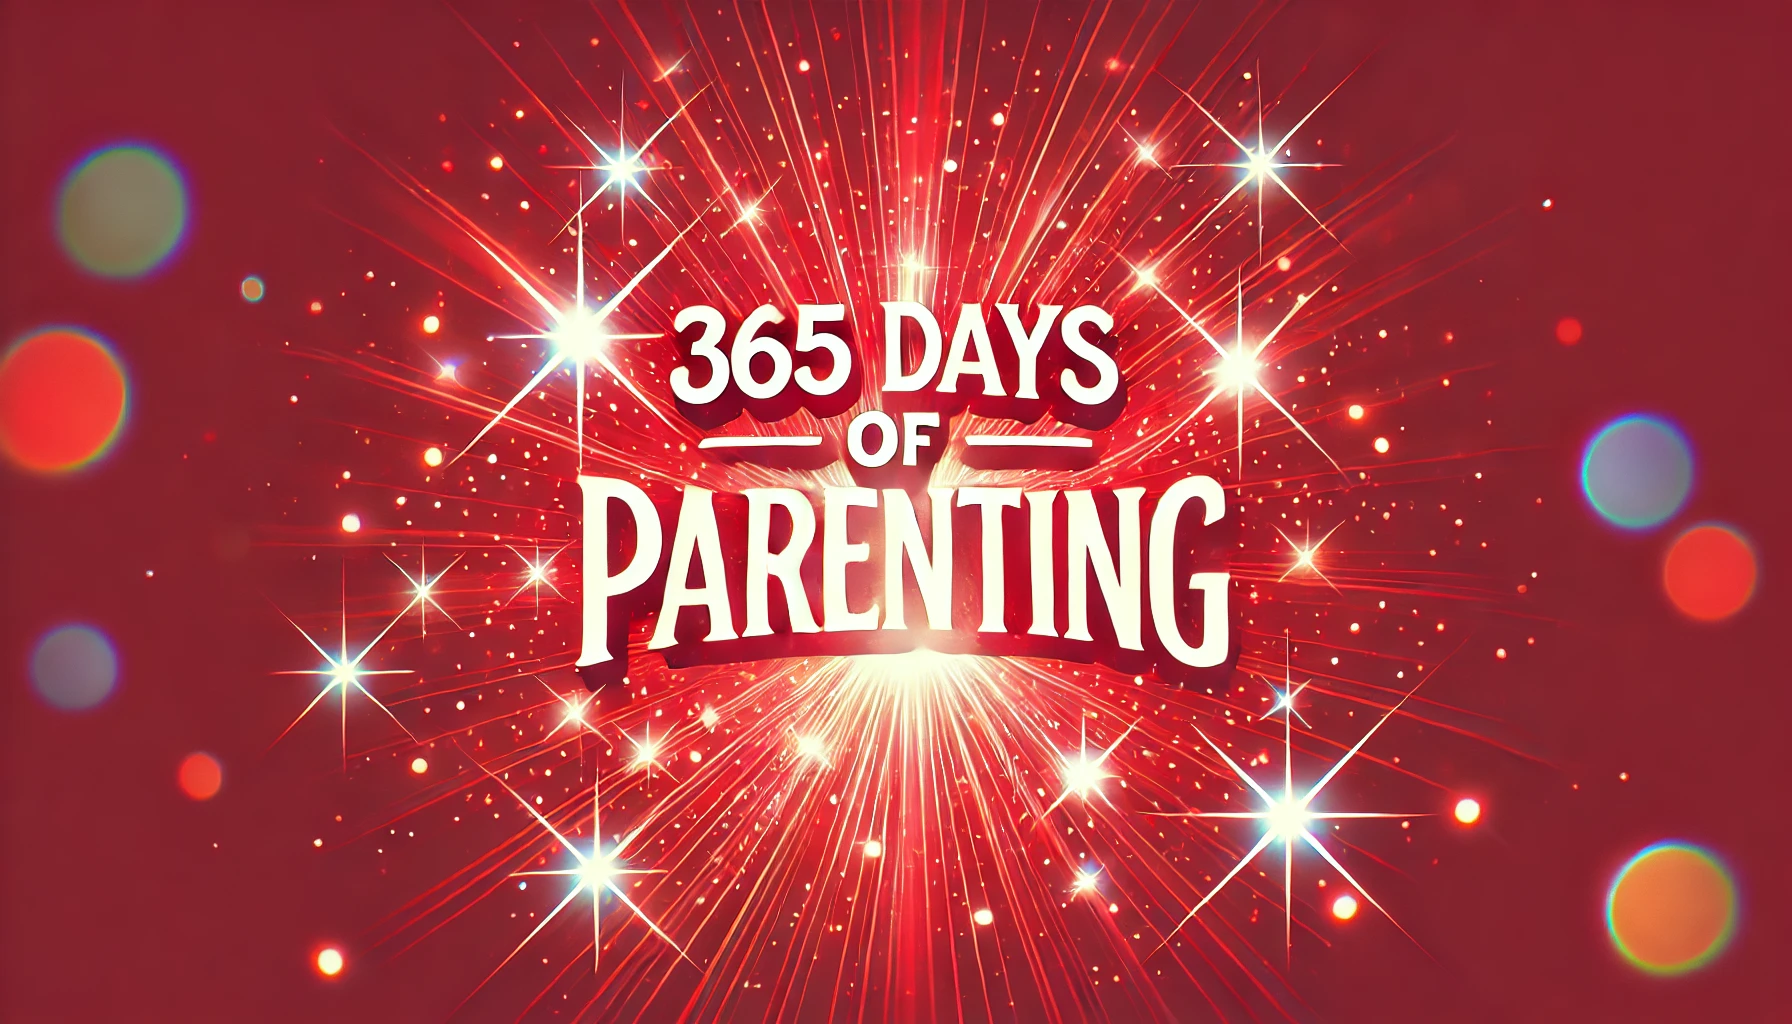 Daily Parenting Lessons for 365 Days